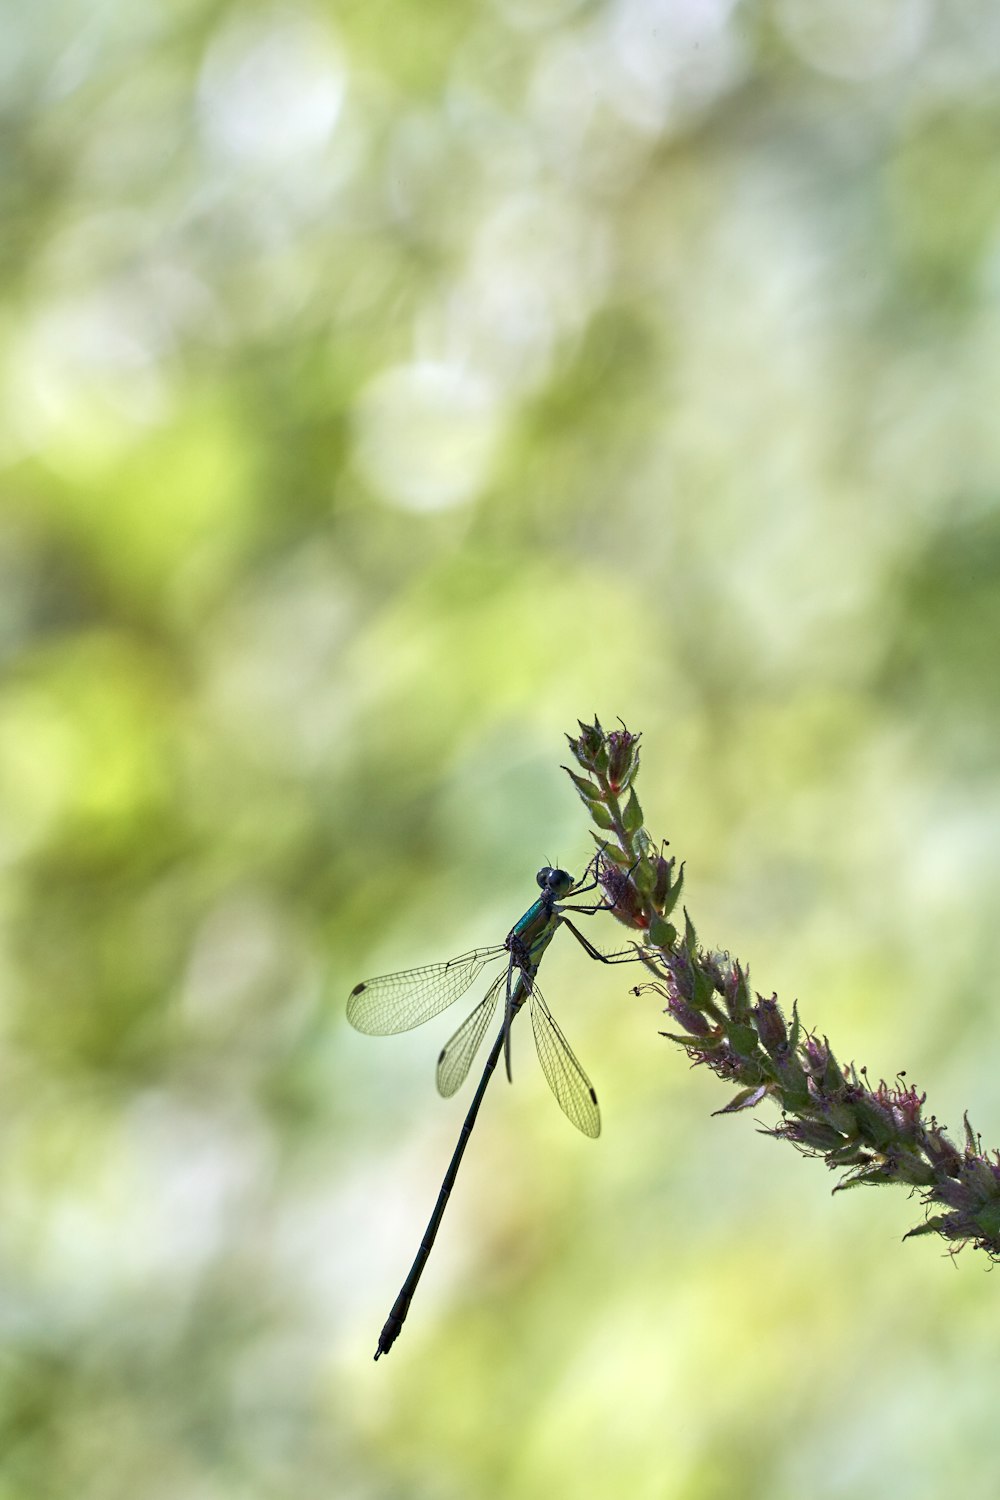 blue damselfly perched on purple flower in close up photography during daytime